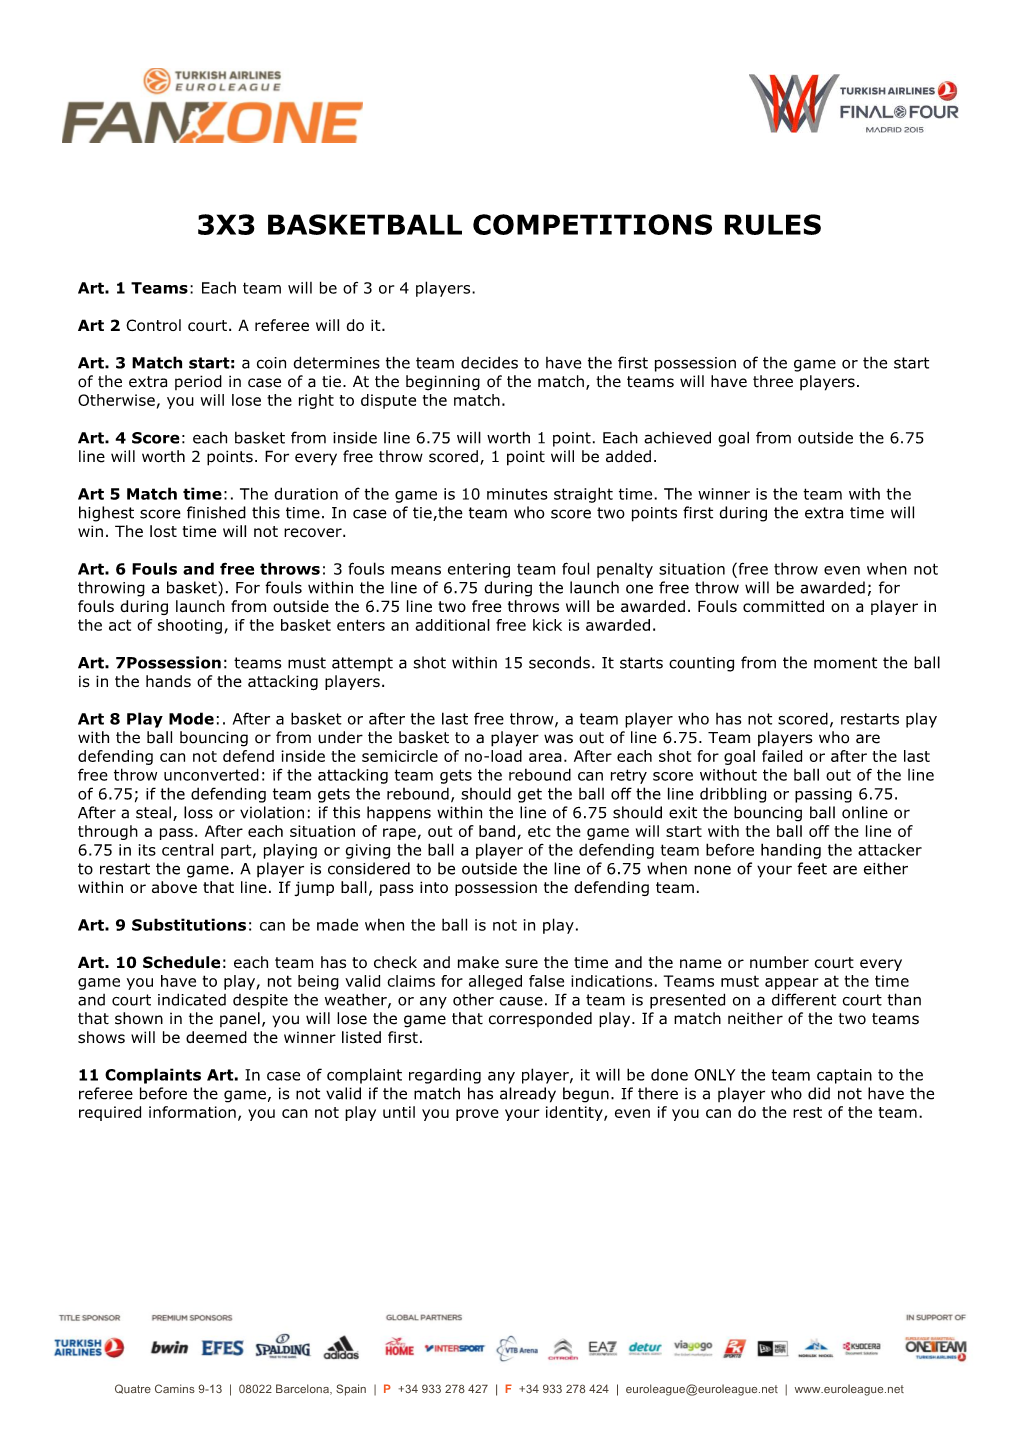 3X3 Basketball Competitions Rules